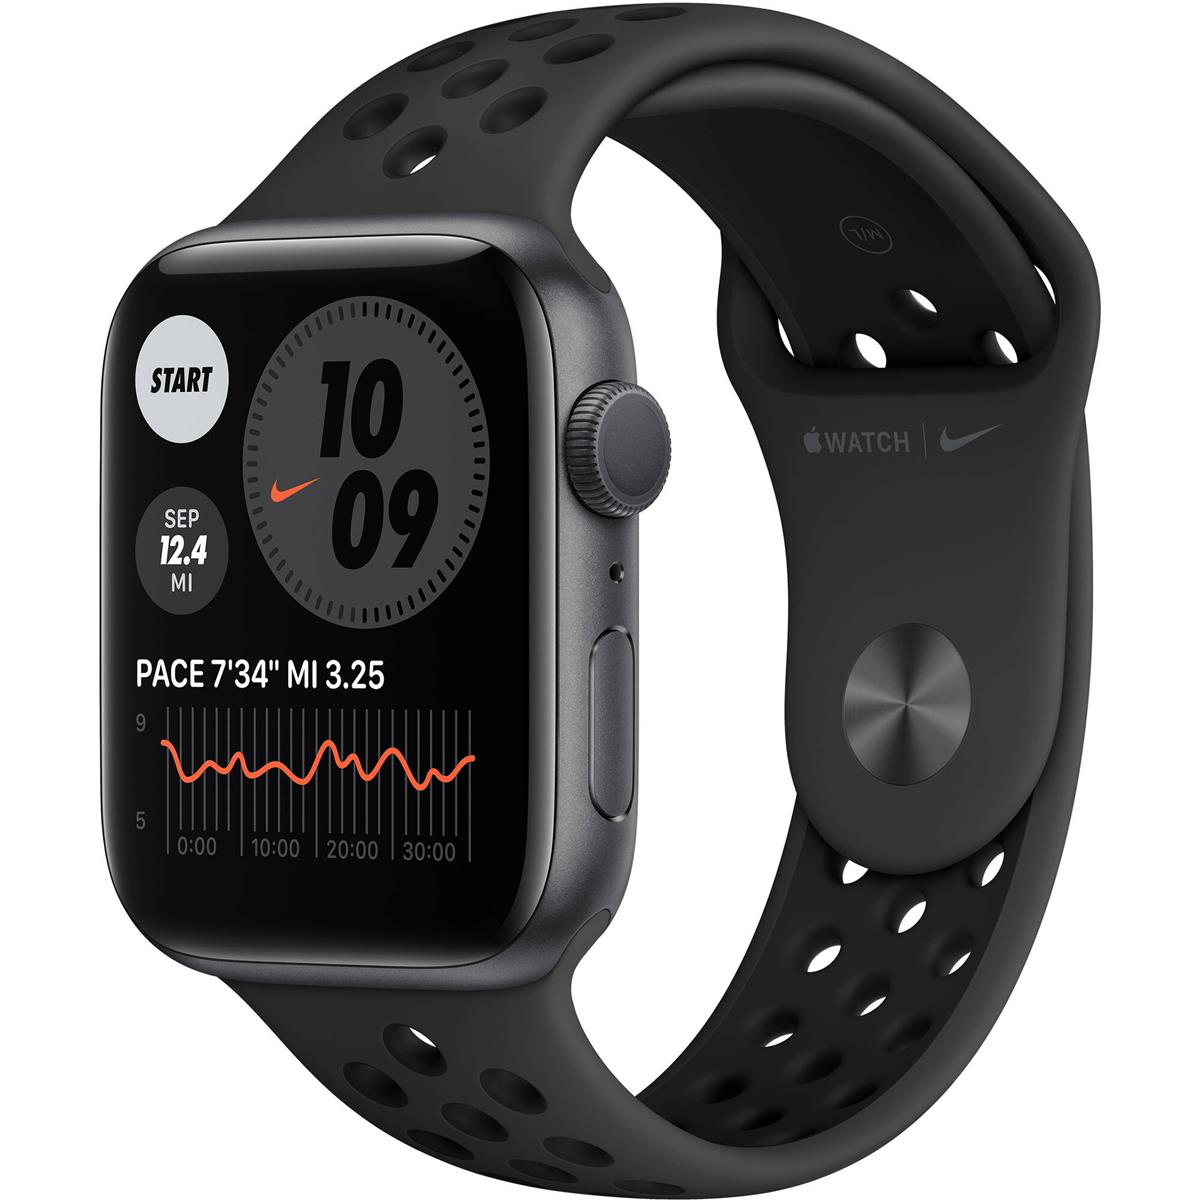 Apple Watch Nike 6 GPS, 44mm Space Gray AL Case w/Anthracite Sport Band, Regular -  MG173LL/A